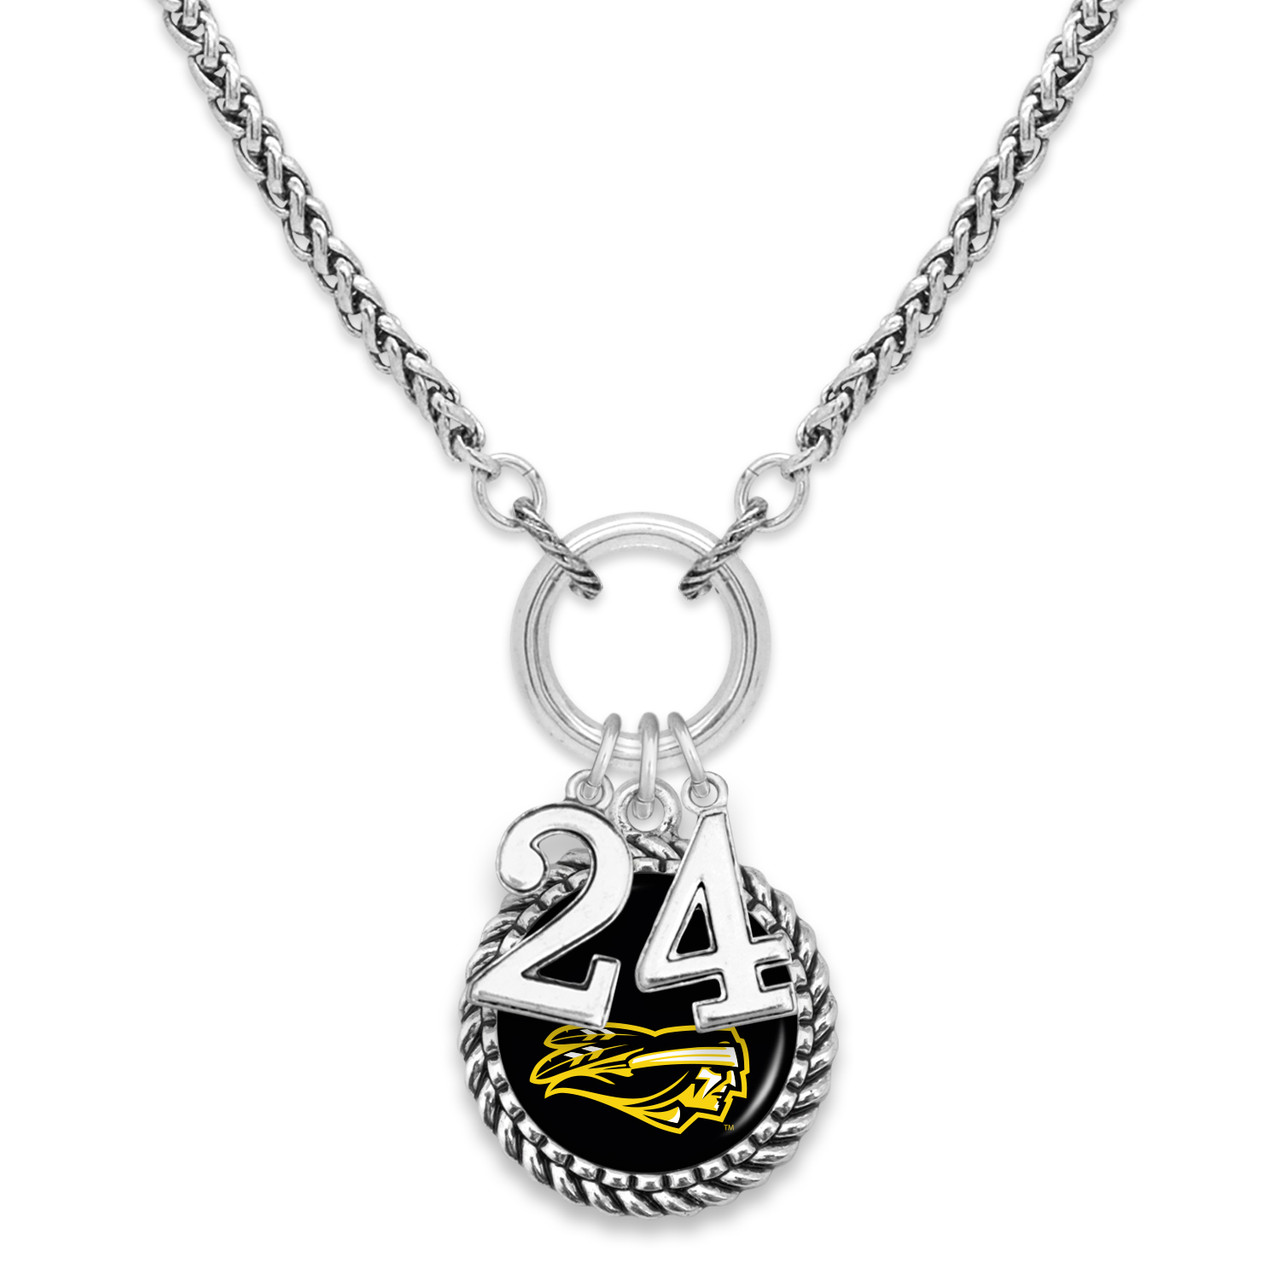 Tyler Apaches - Graduation Year Necklace